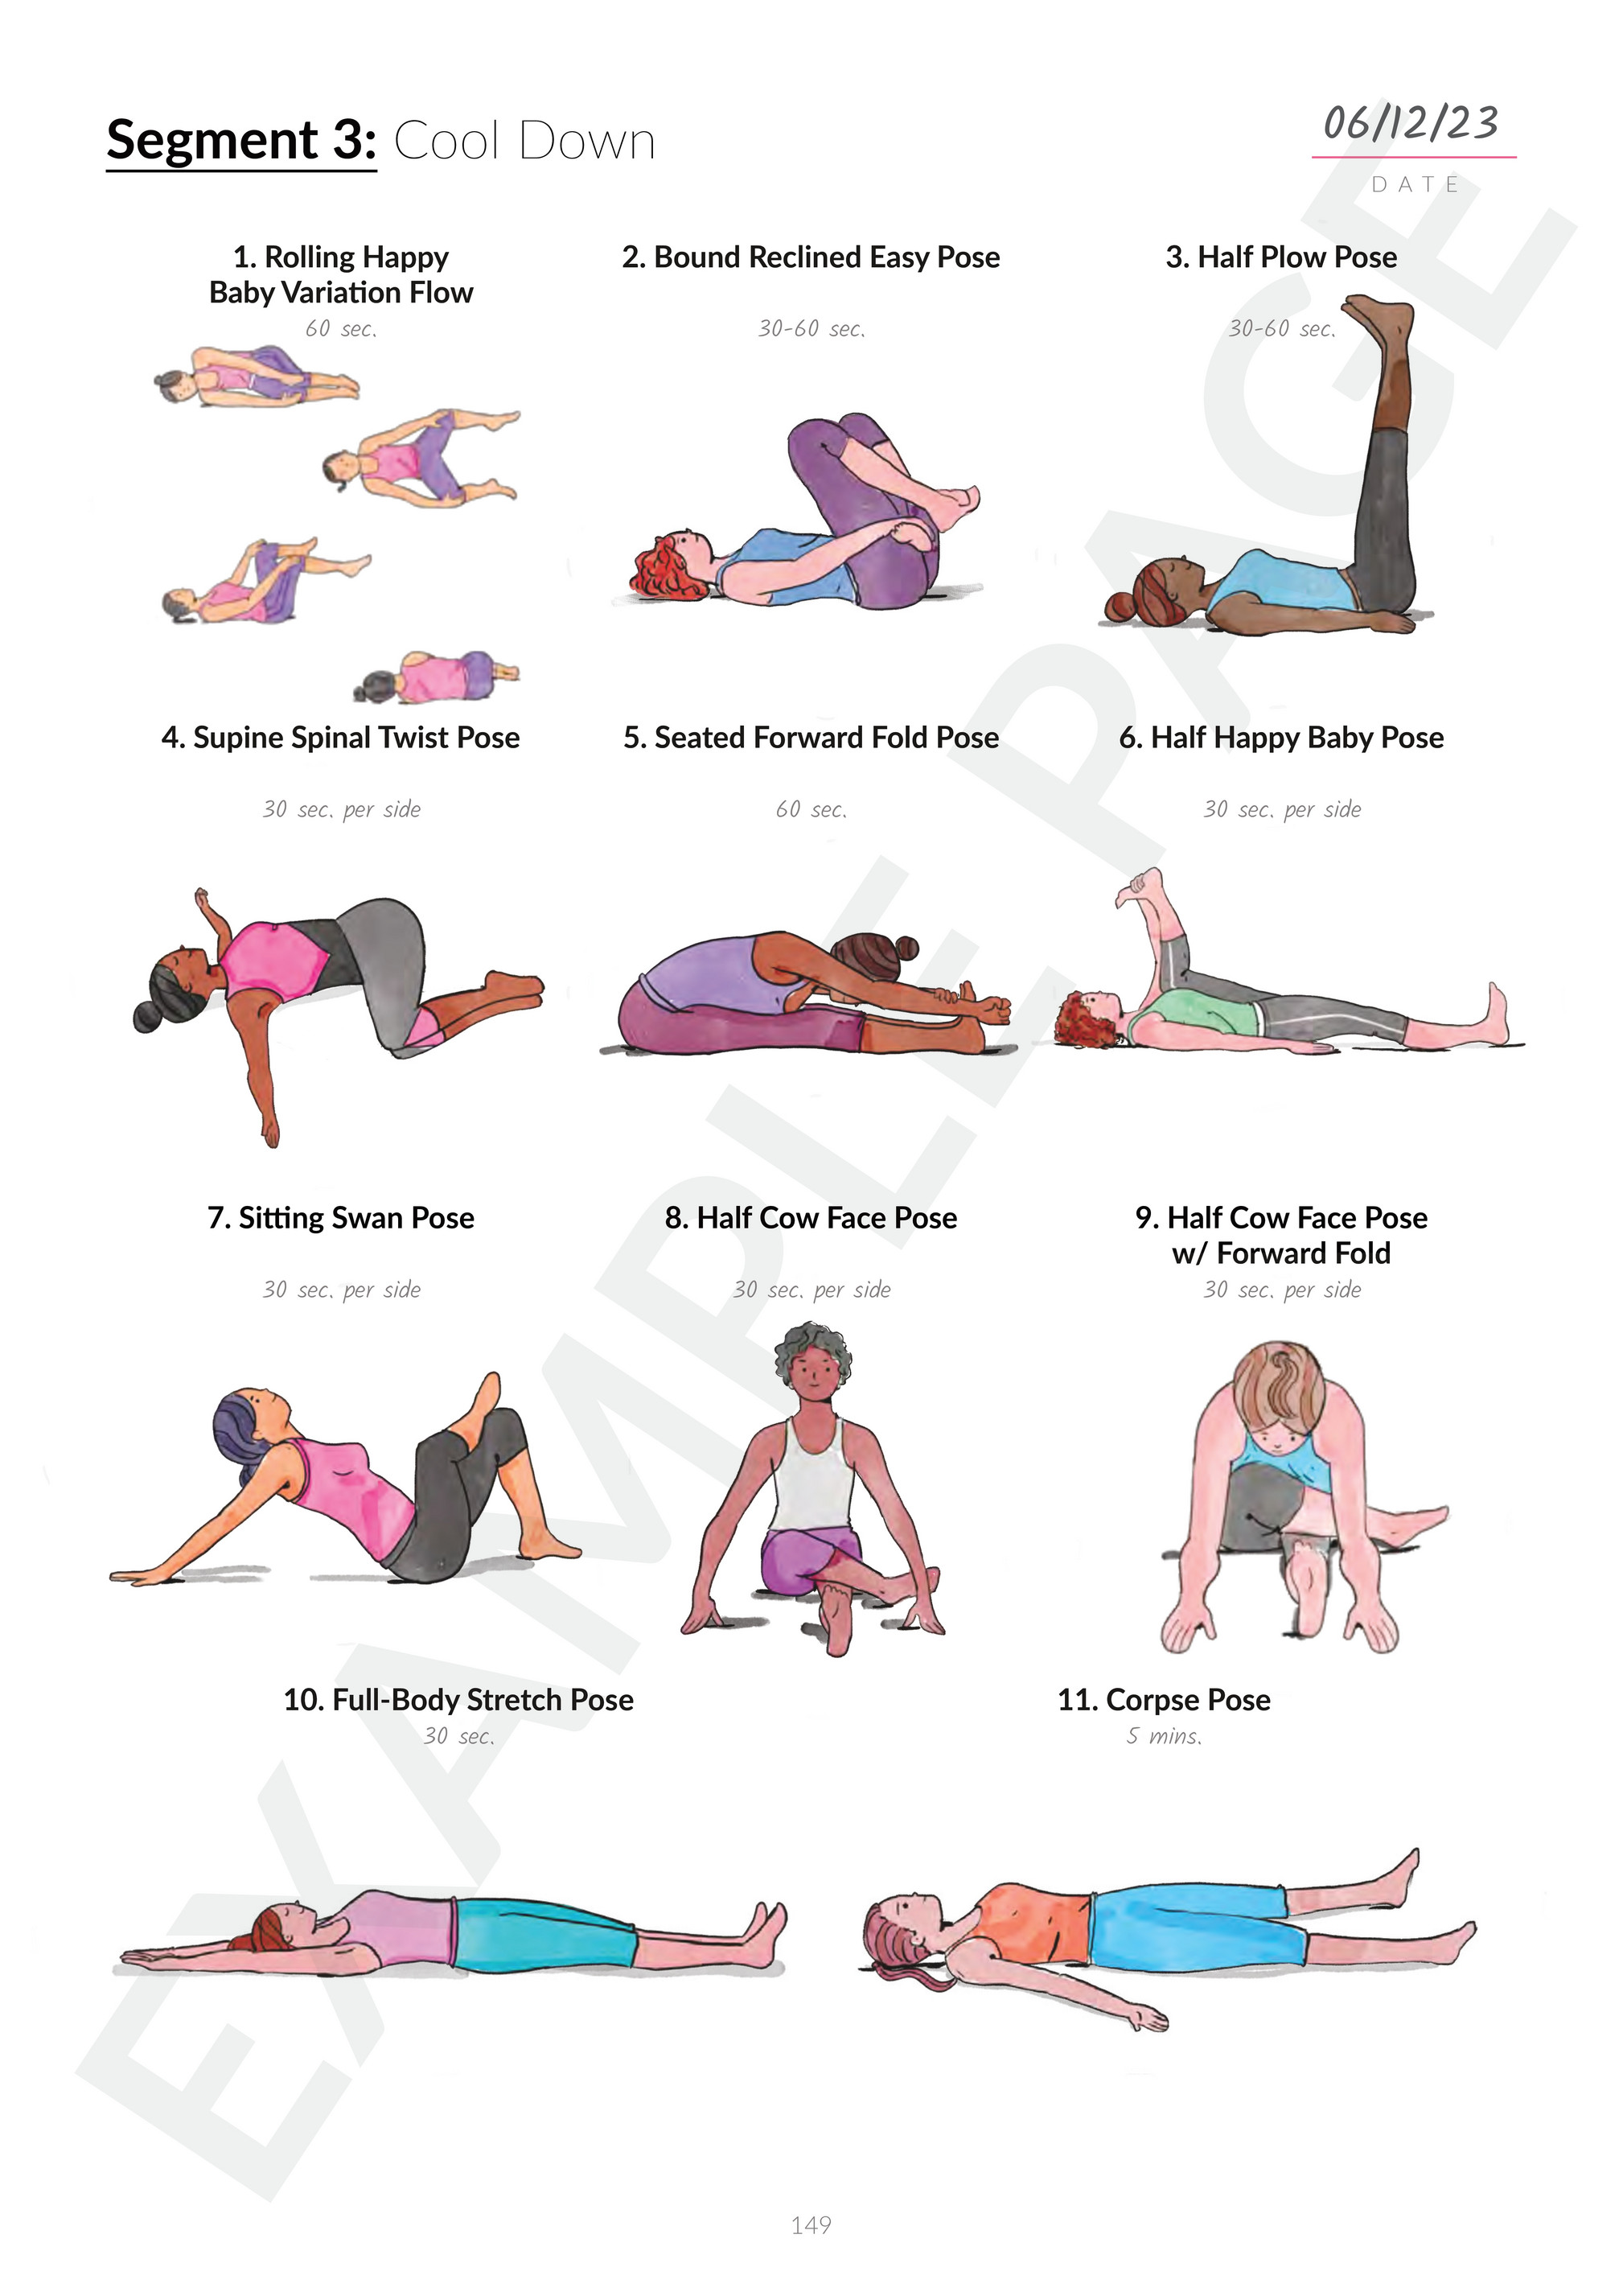 11 Effective Yoga Asanas To Stimulate Your Nervous System